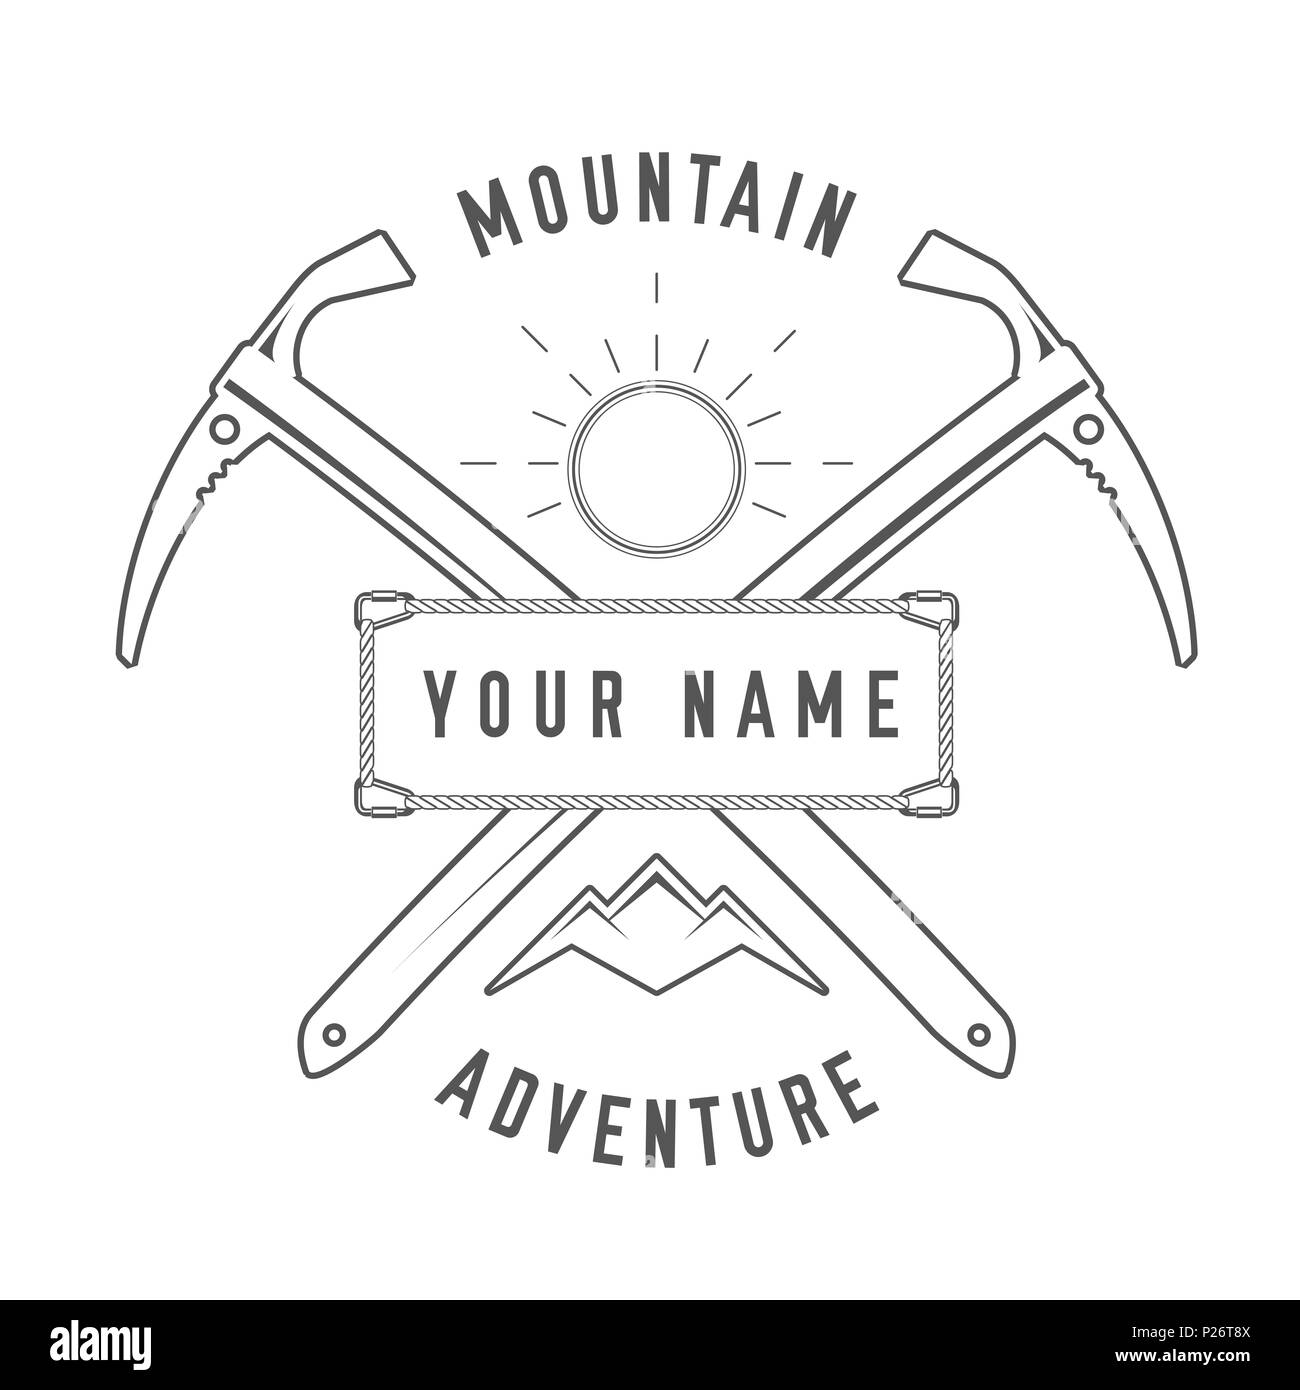 Mountain Adventure - Alpine Club Emblem - Icon - Print - Badge in Vintage Black and White Style. Concept for Shirt or Label, Stamp or Tee. Stock Photo